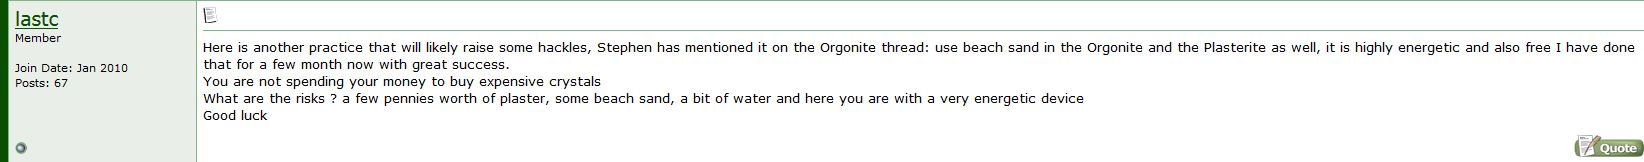 2015-05-17 11_03_55-Plasterite, the other Orgonite - Page 8 - David Icke's Official Forums.jpg